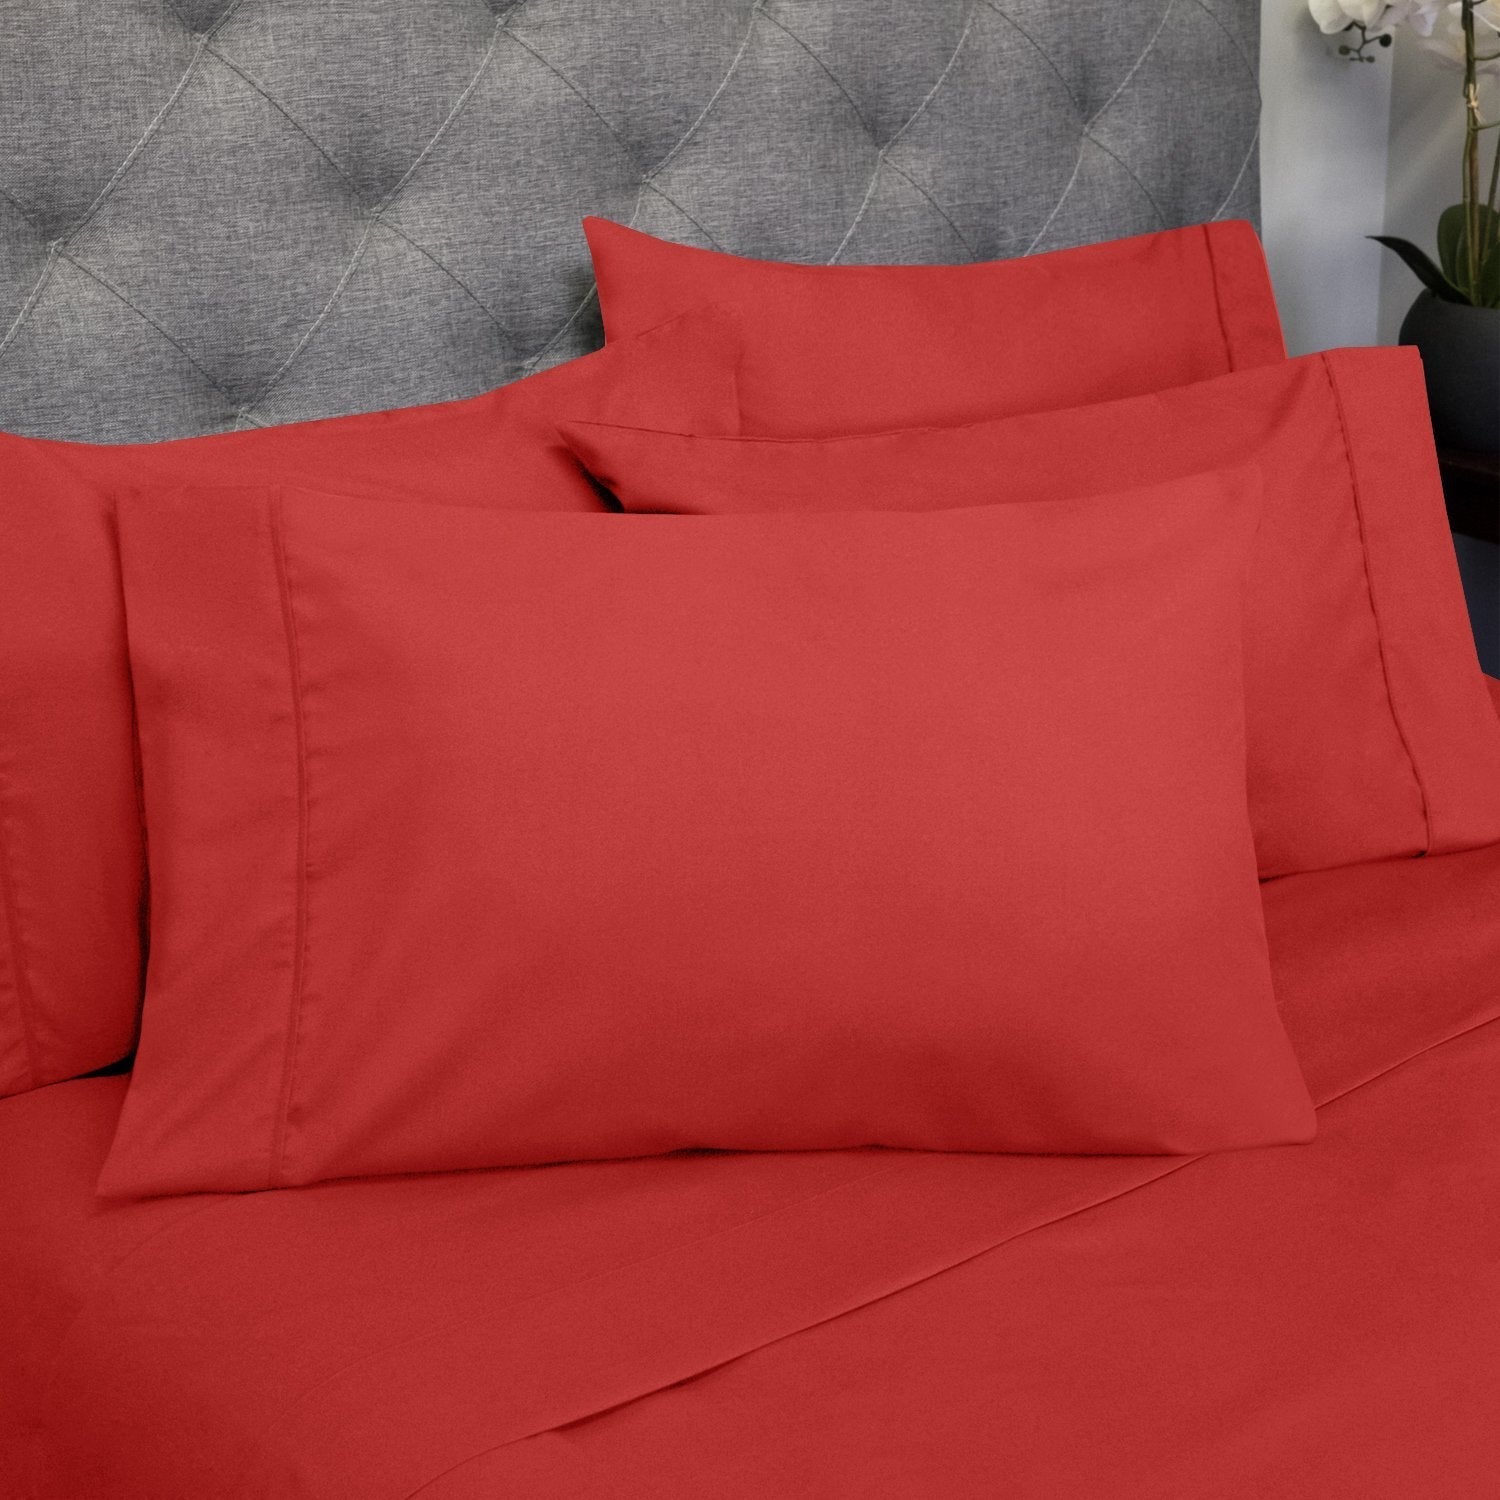 Deluxe 6-Piece Bed Sheet Set (Red) - Pillowcases